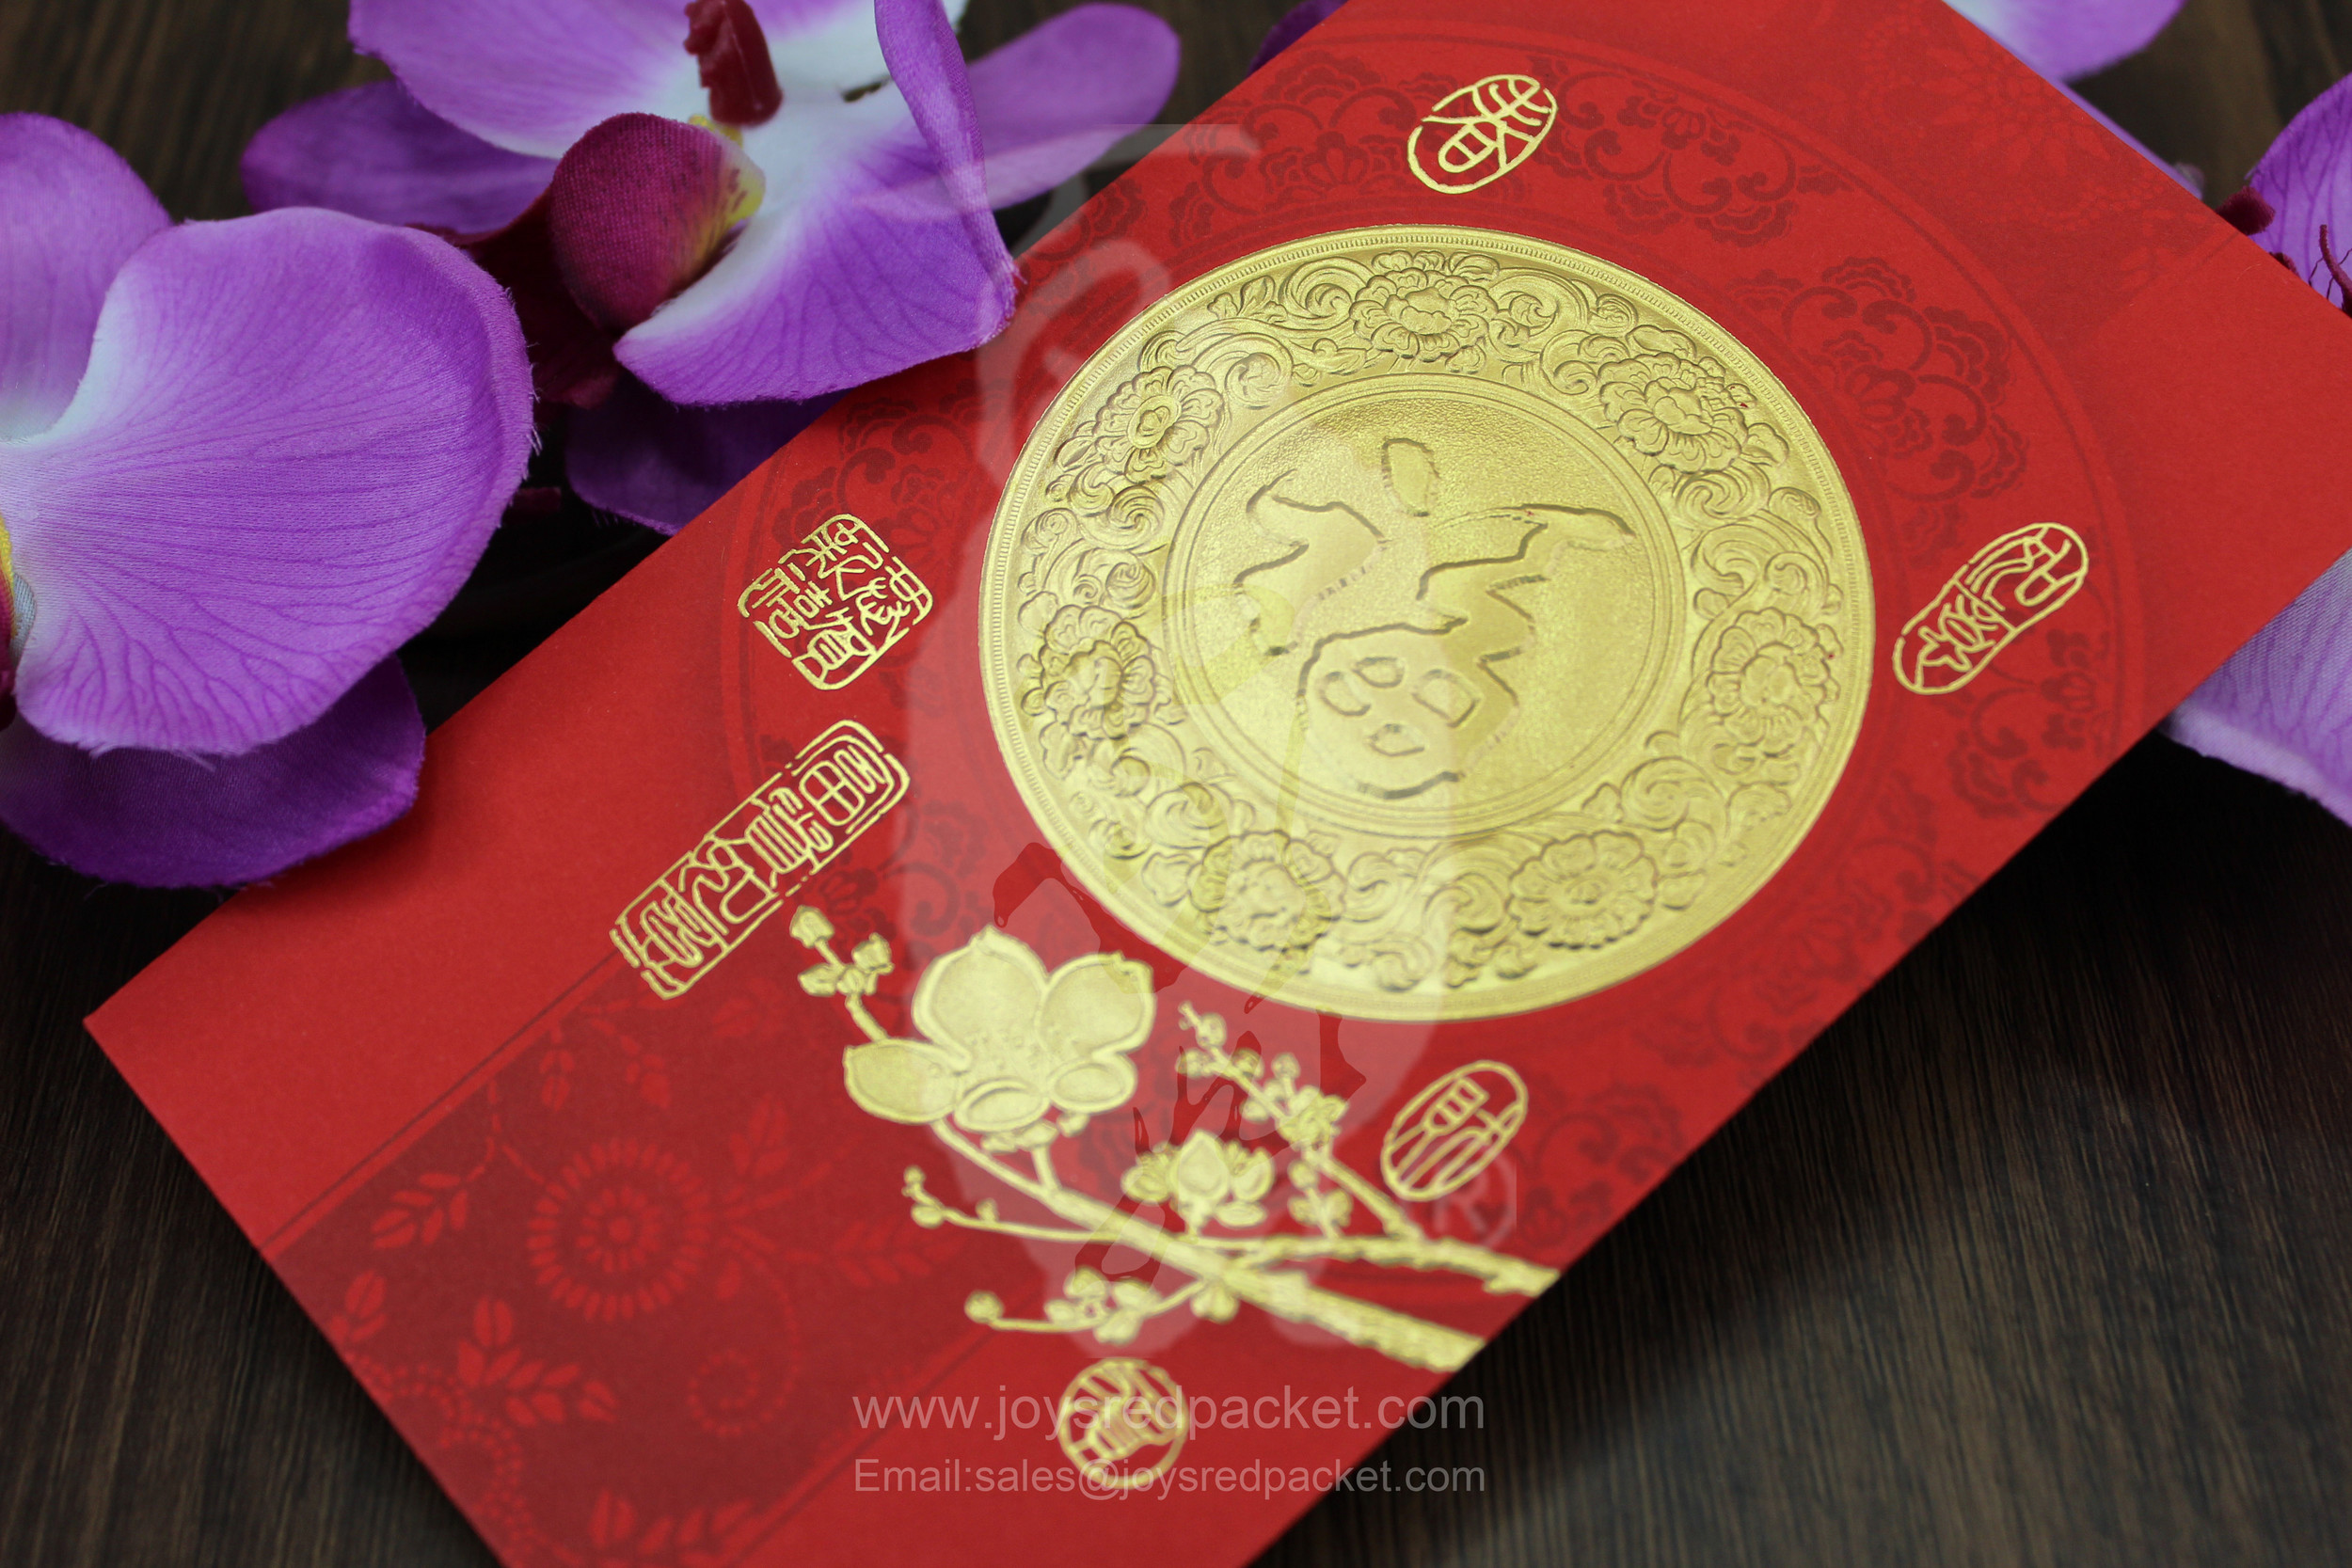 Red Packet Pack of 10 Fortune Design Lucky Money Money Envelope Hongbao 